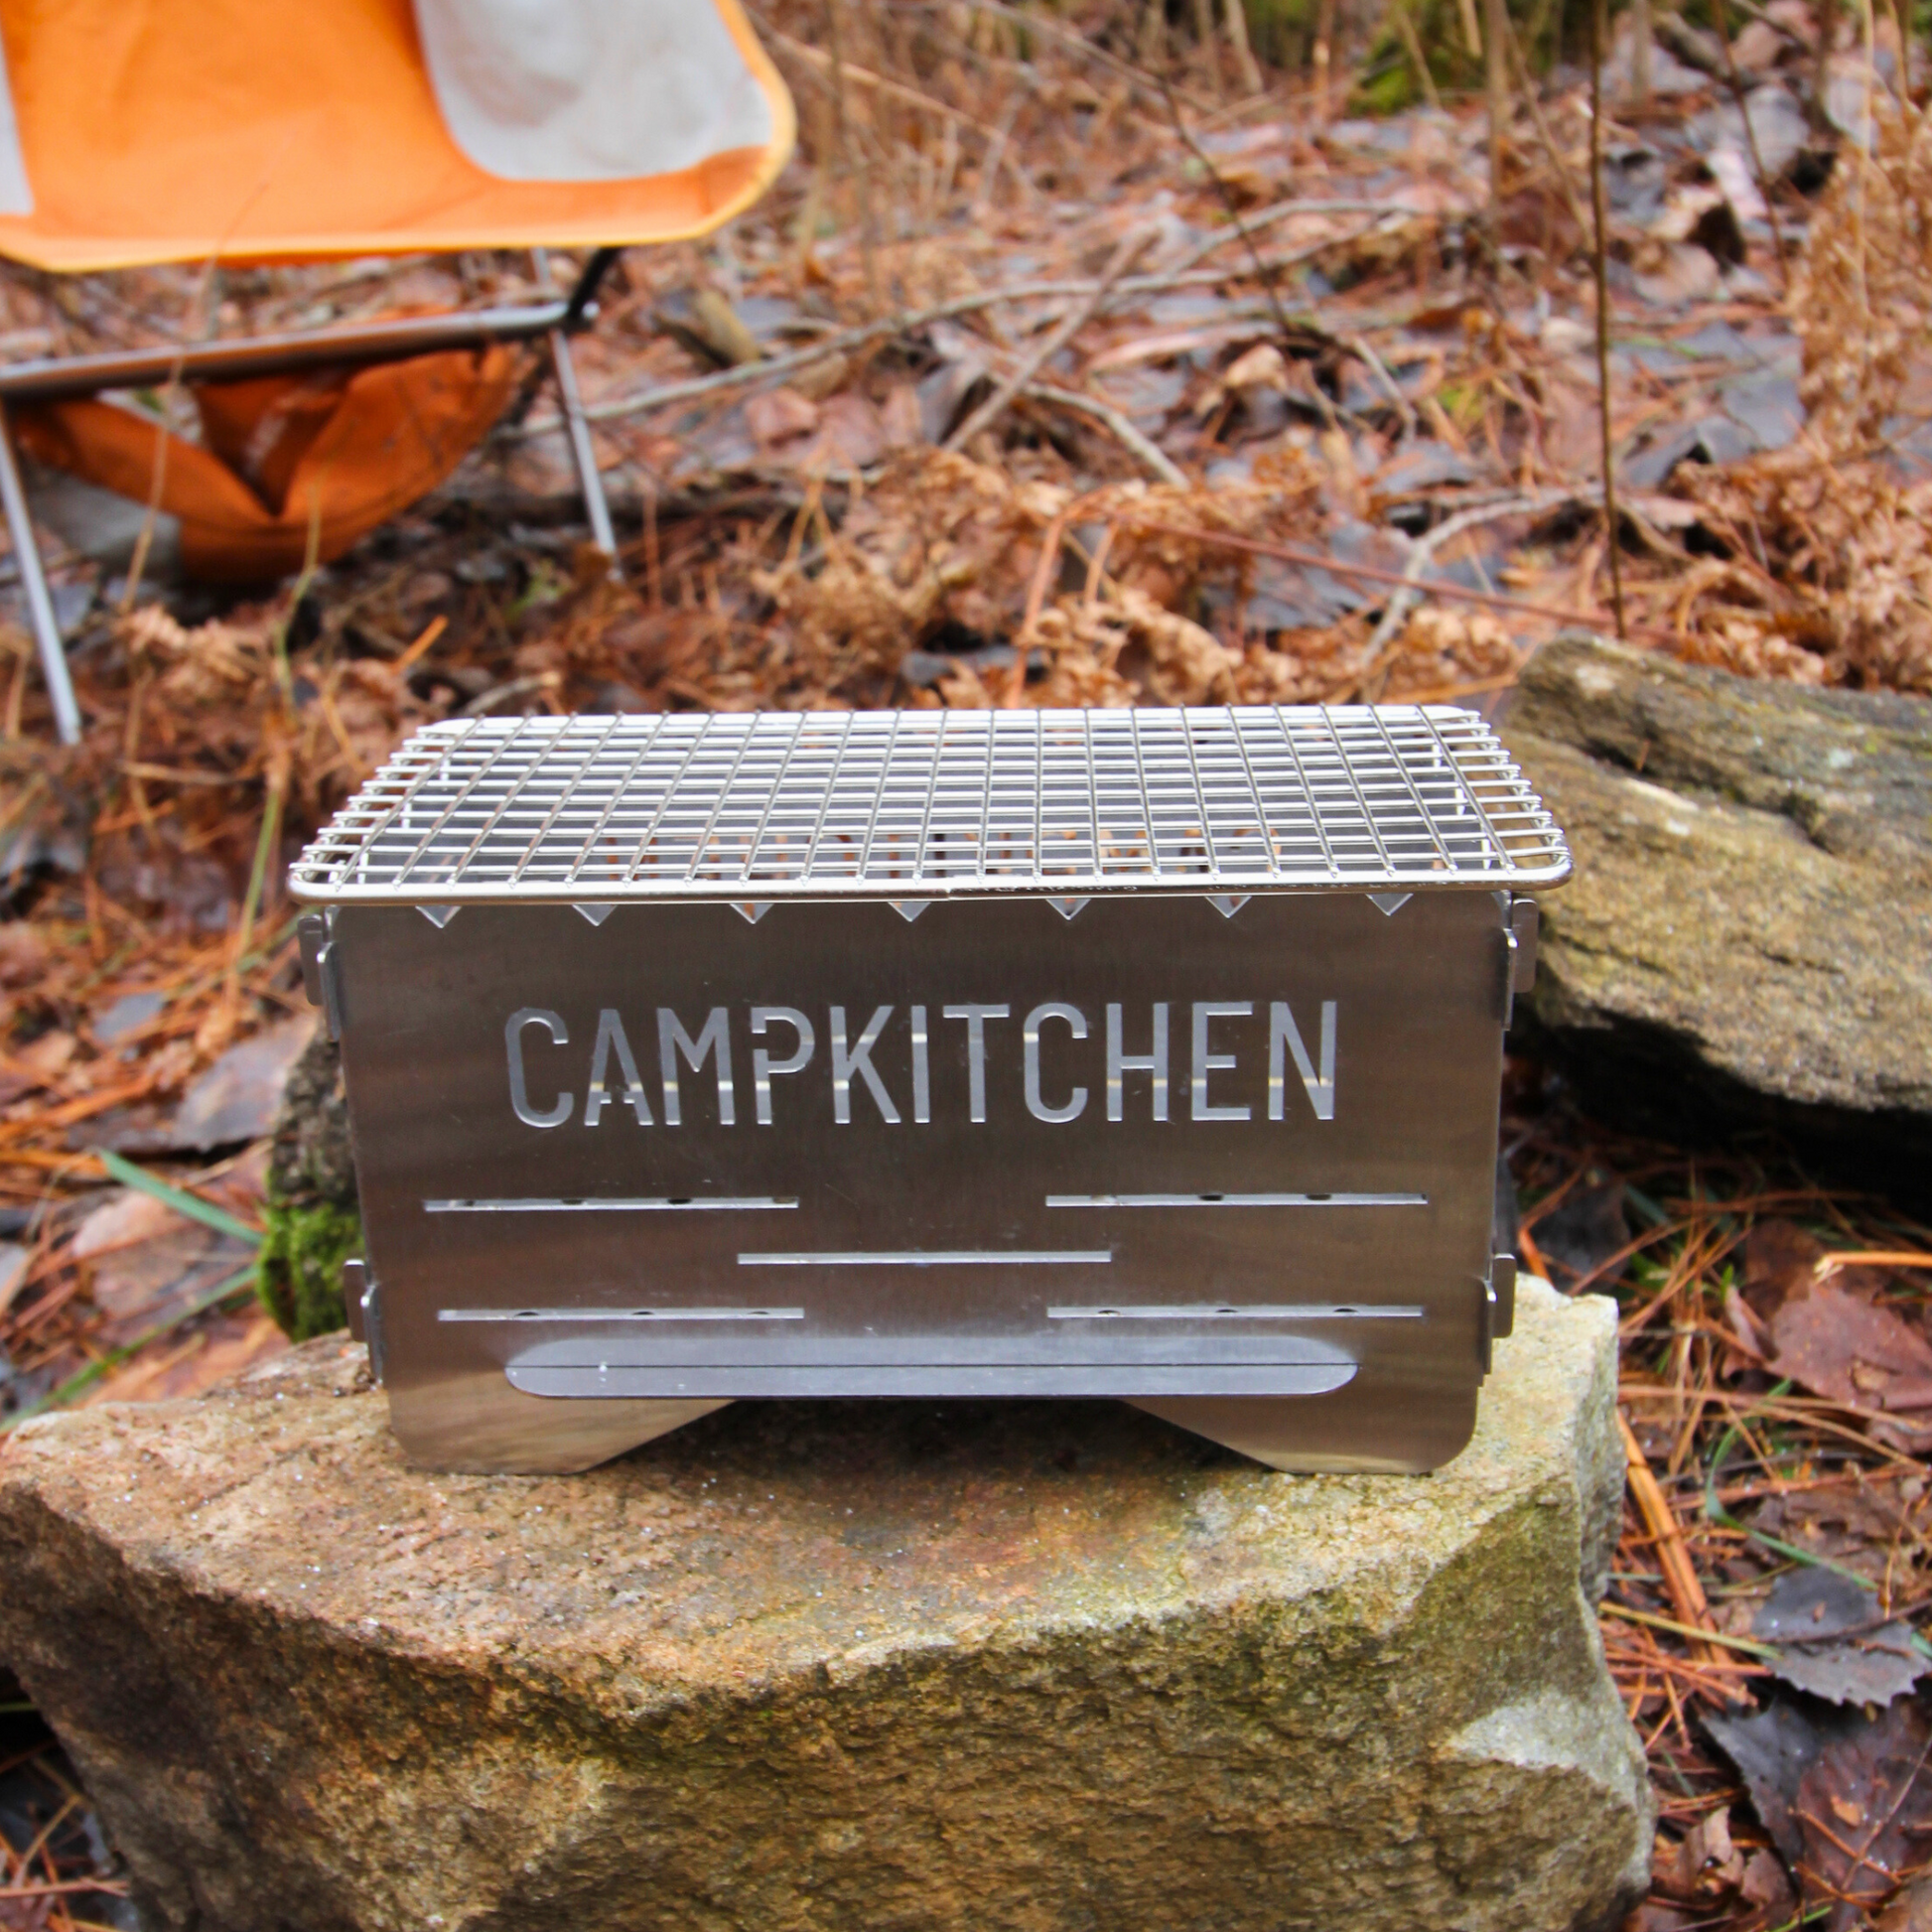 CAMPKITCHEN Twig Stove complete with grate top resting on a large rock.